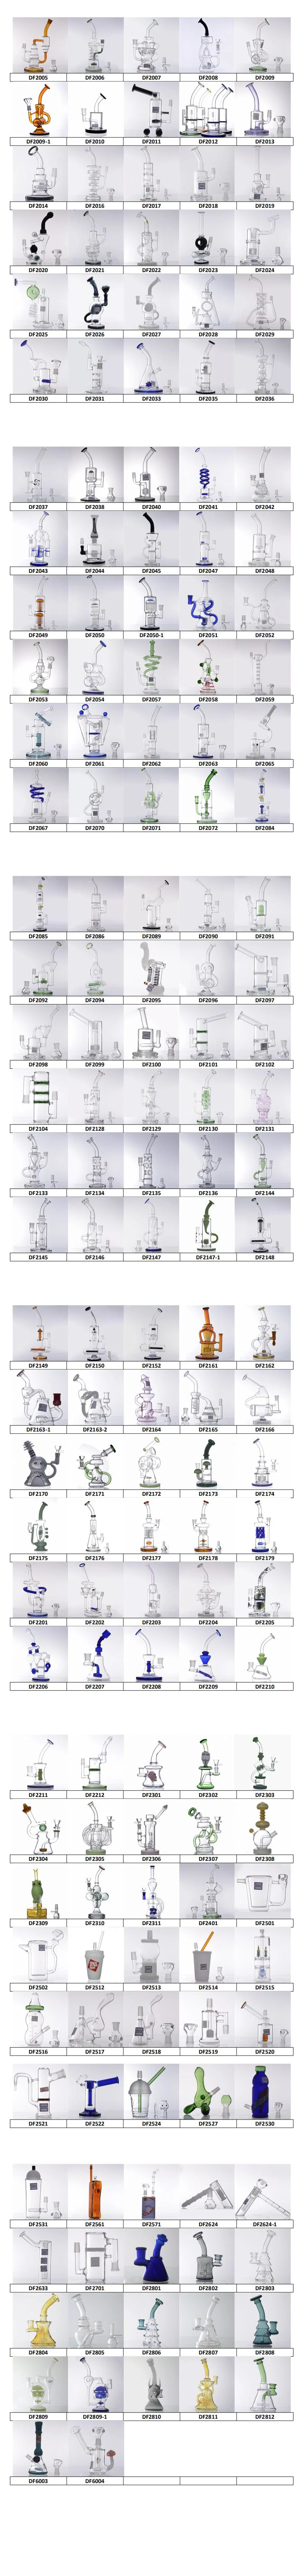 DF2133 Clear Pipe Clear Filter Glass Smoking Hookah Water Pipe